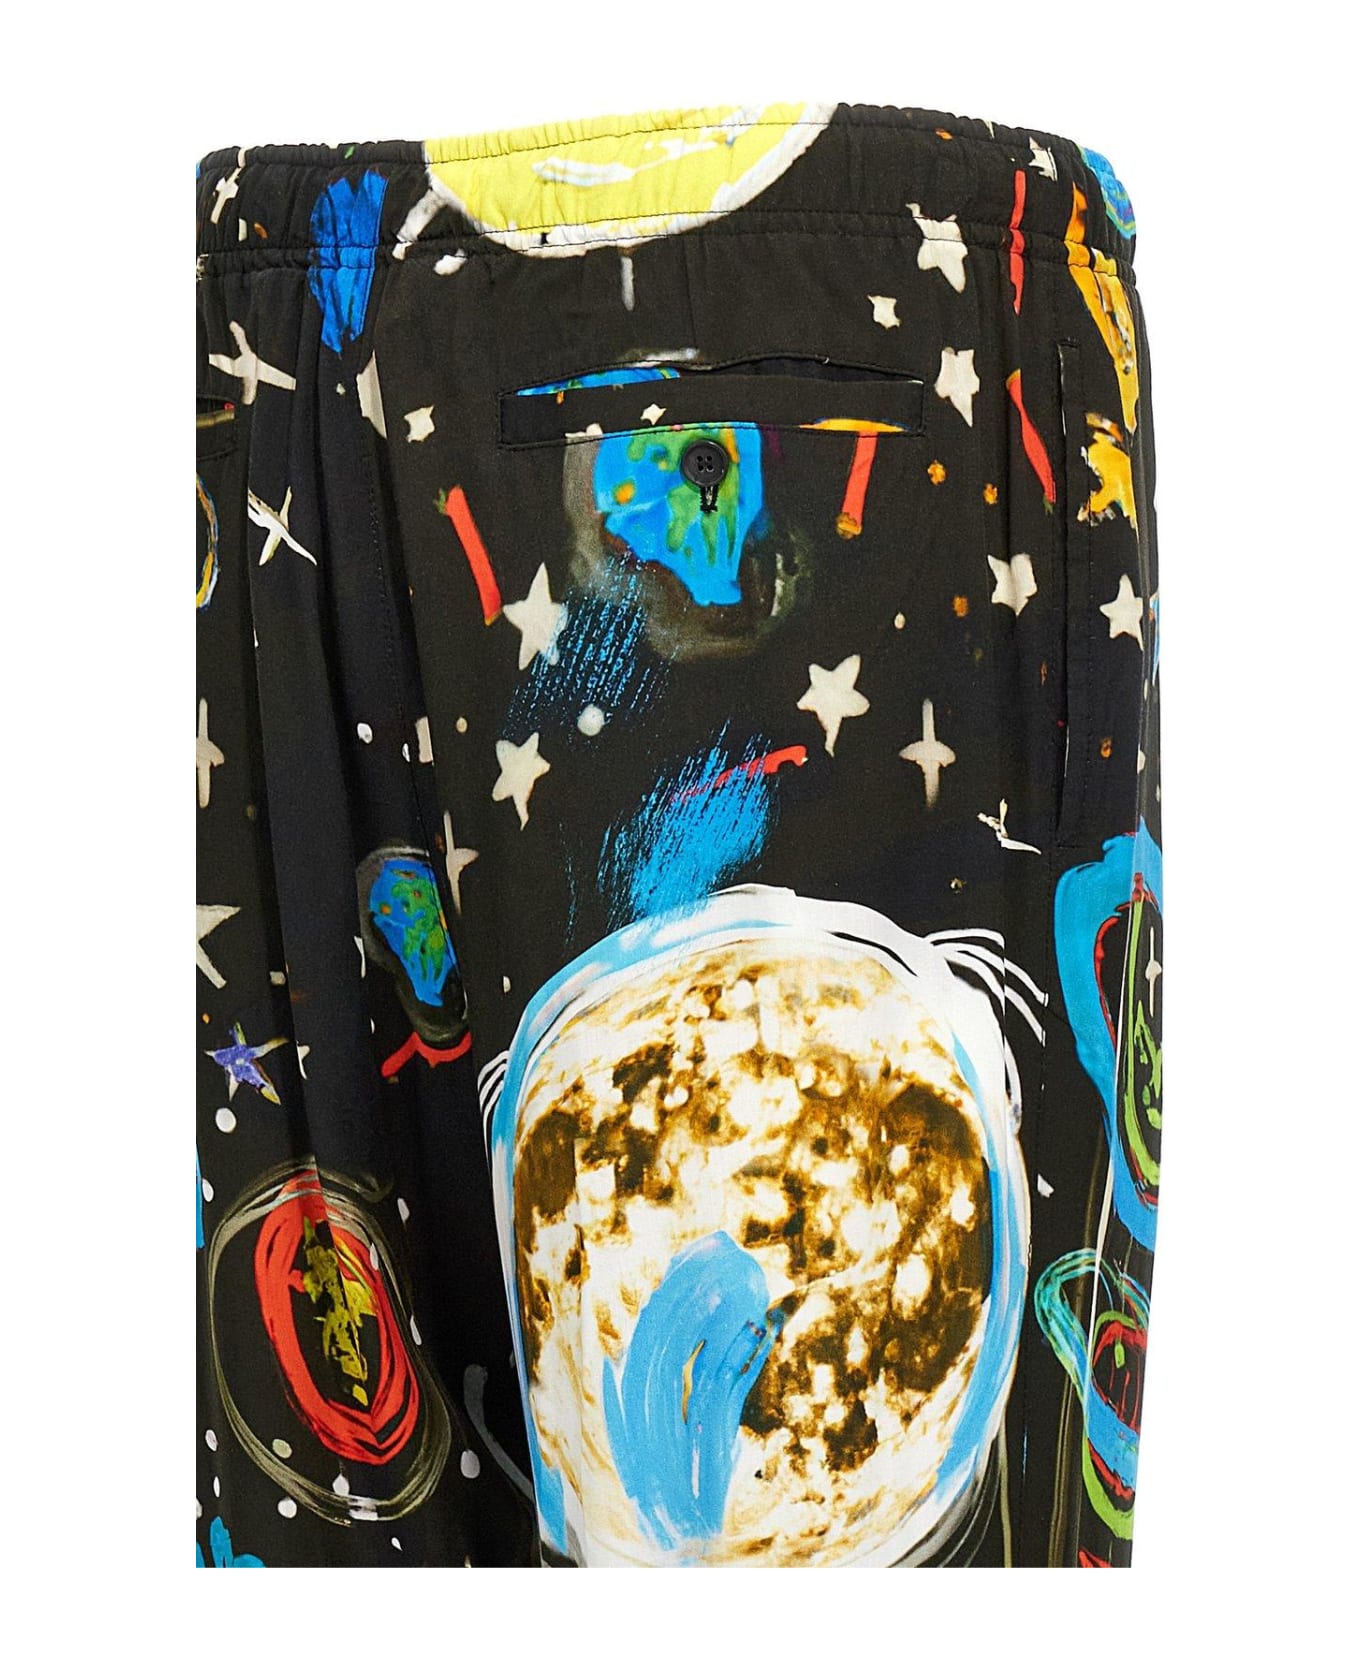 Palm Angels Starry Night Printed Drawstring Pants - Multicolor